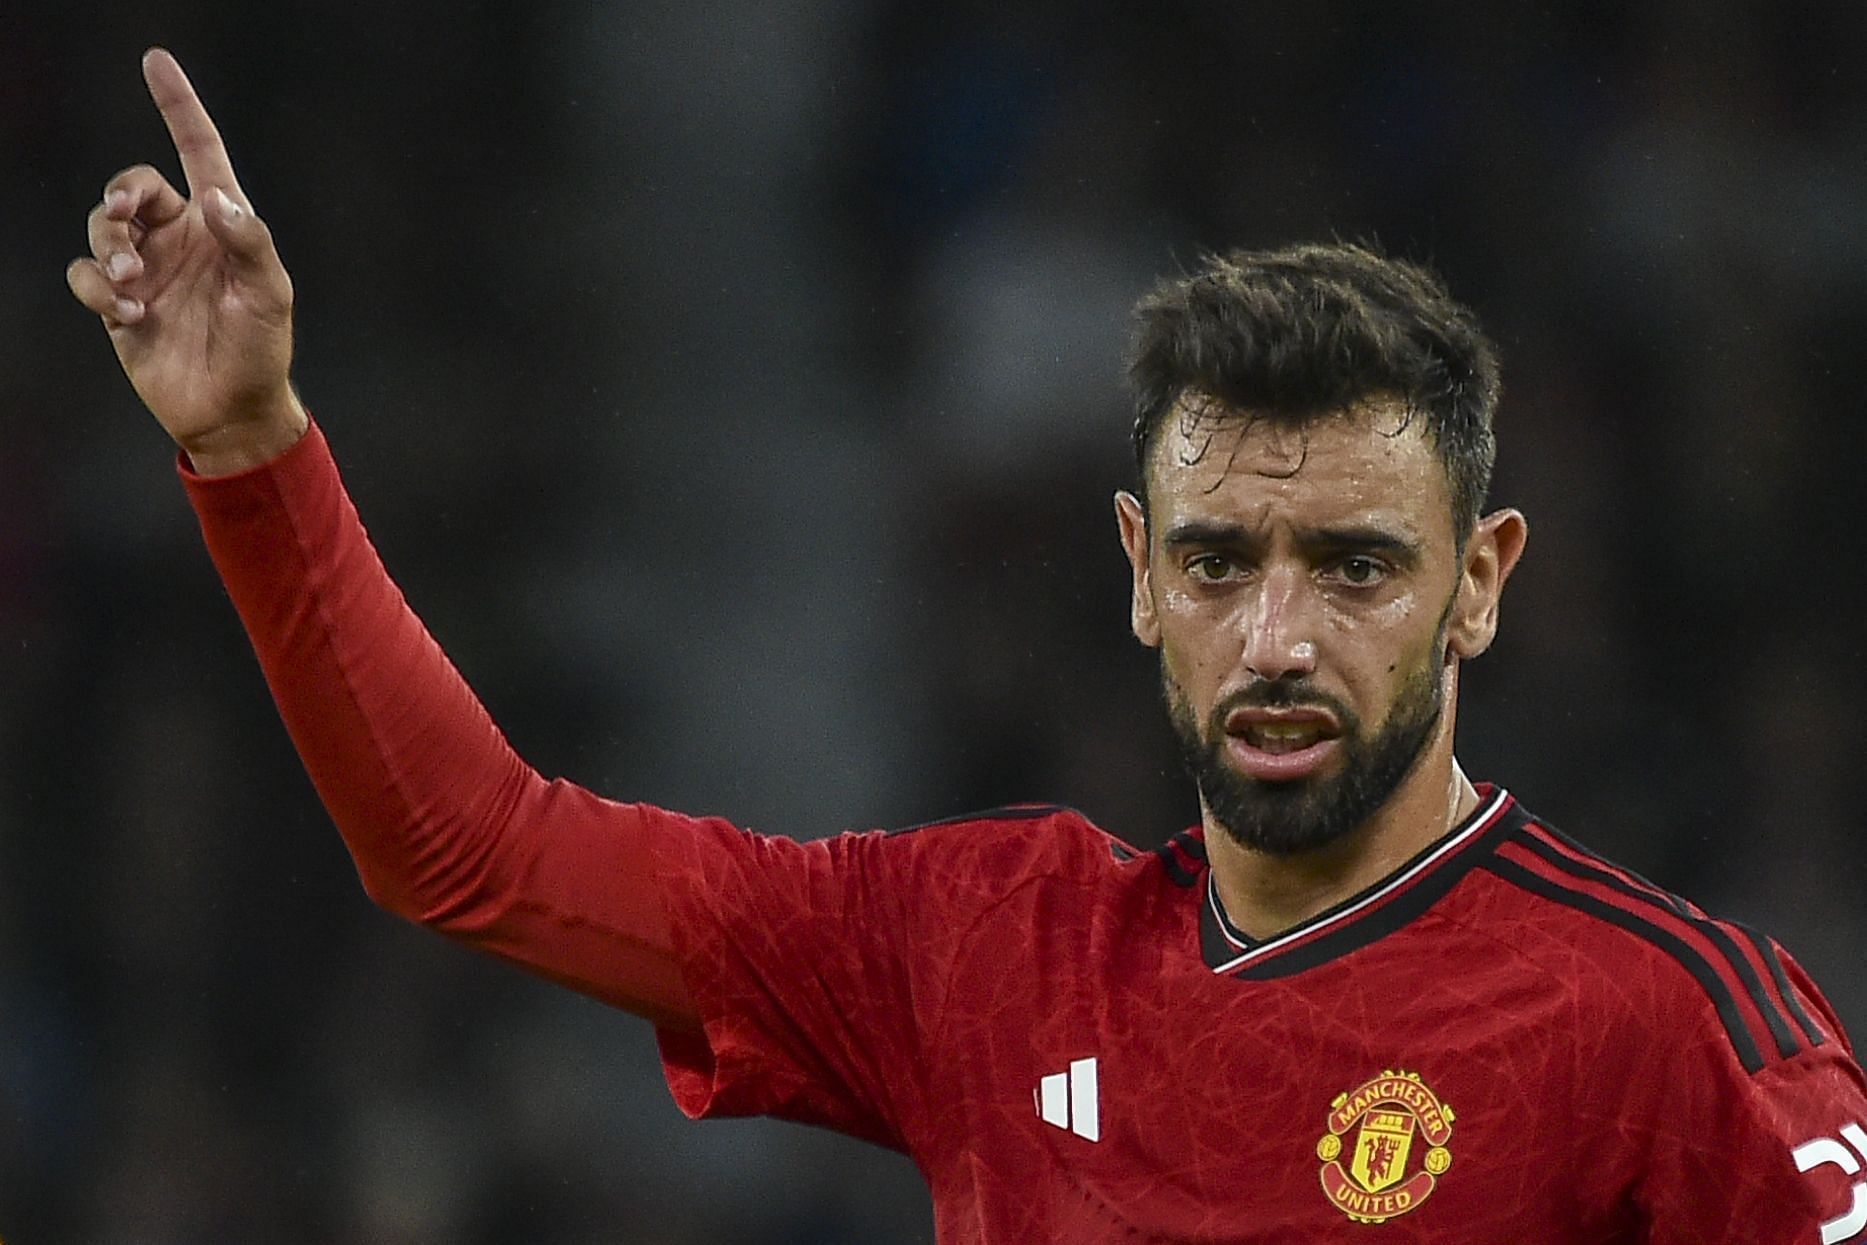 Bruno Fernandes will be eager to leave a mark this season.